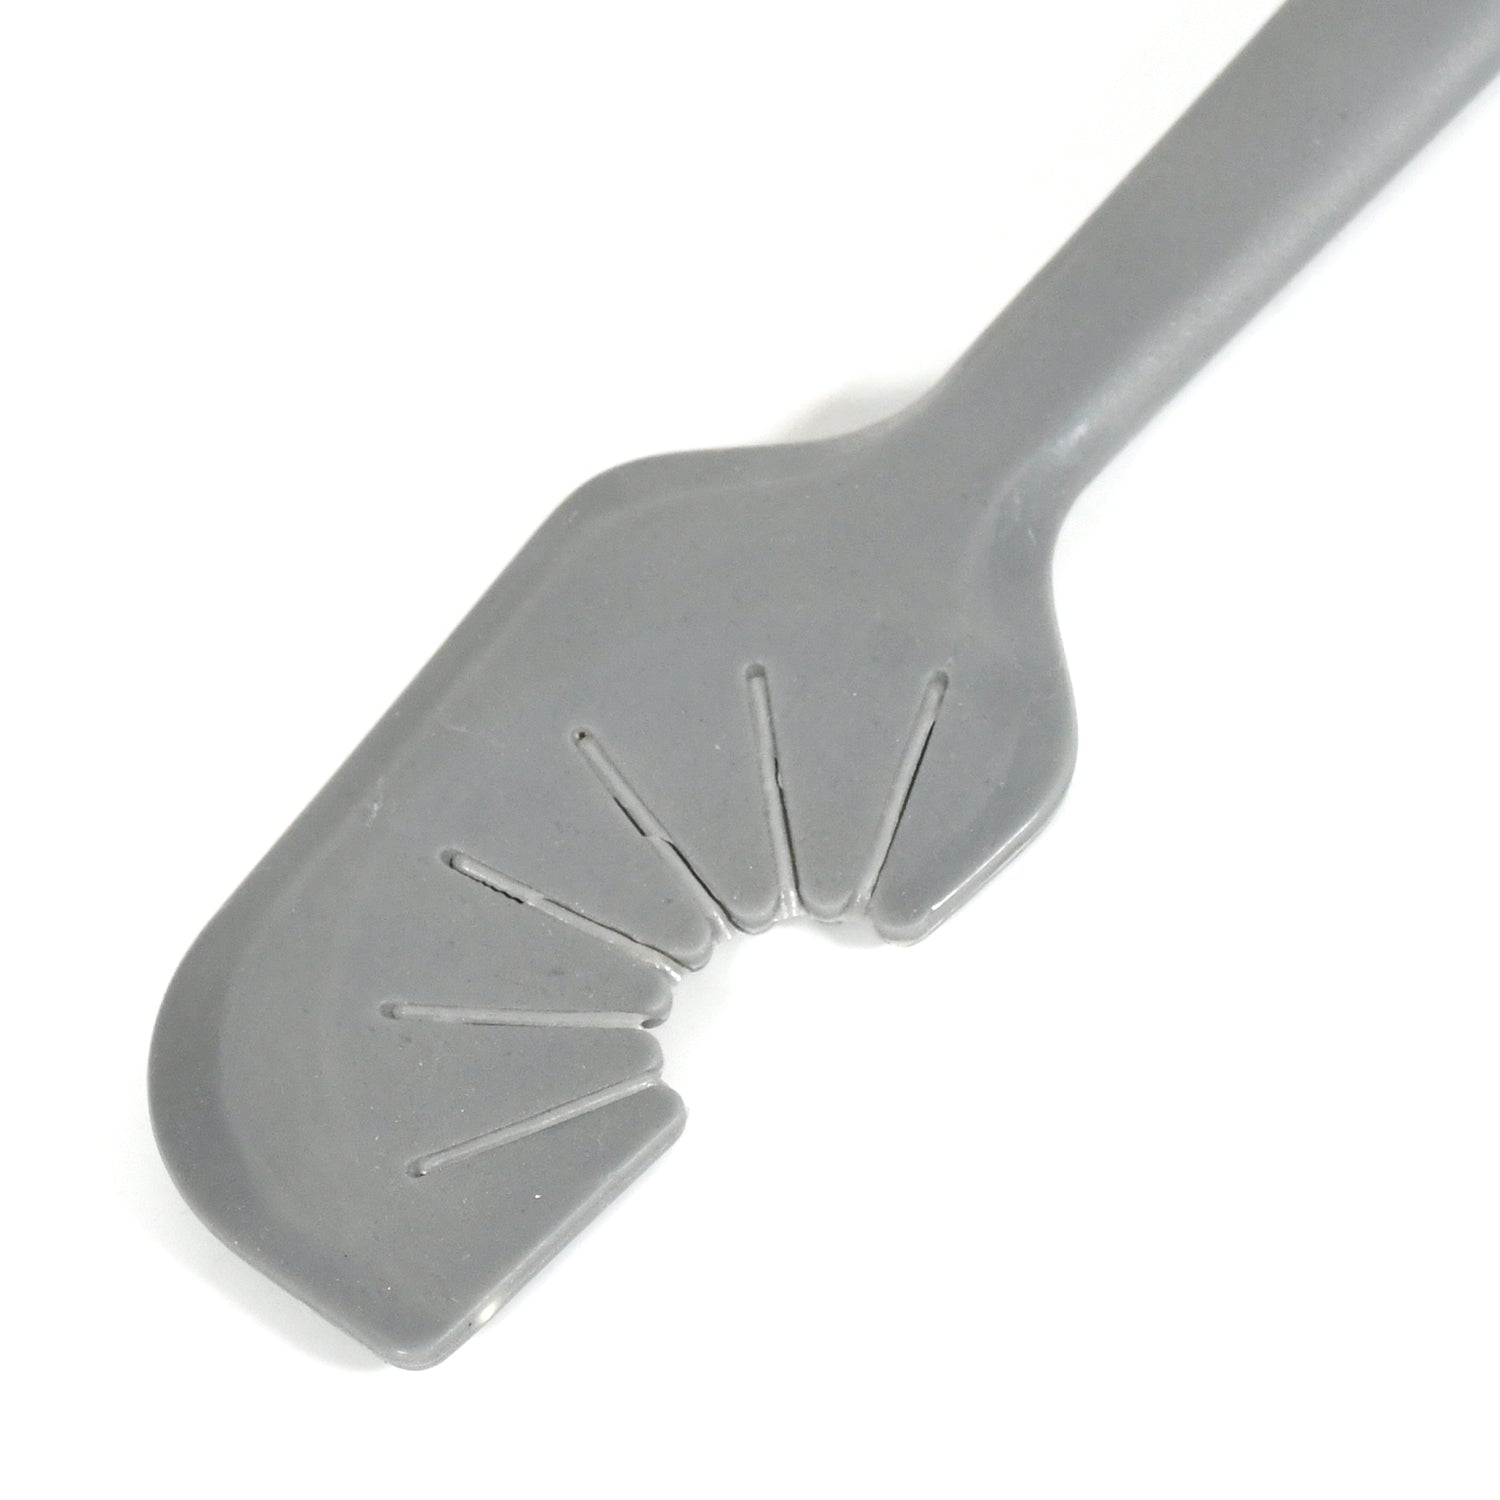  5646 Silicon Whisk Cleaner Kitchen Tool / Whisk Scraper Tool (1Pc)